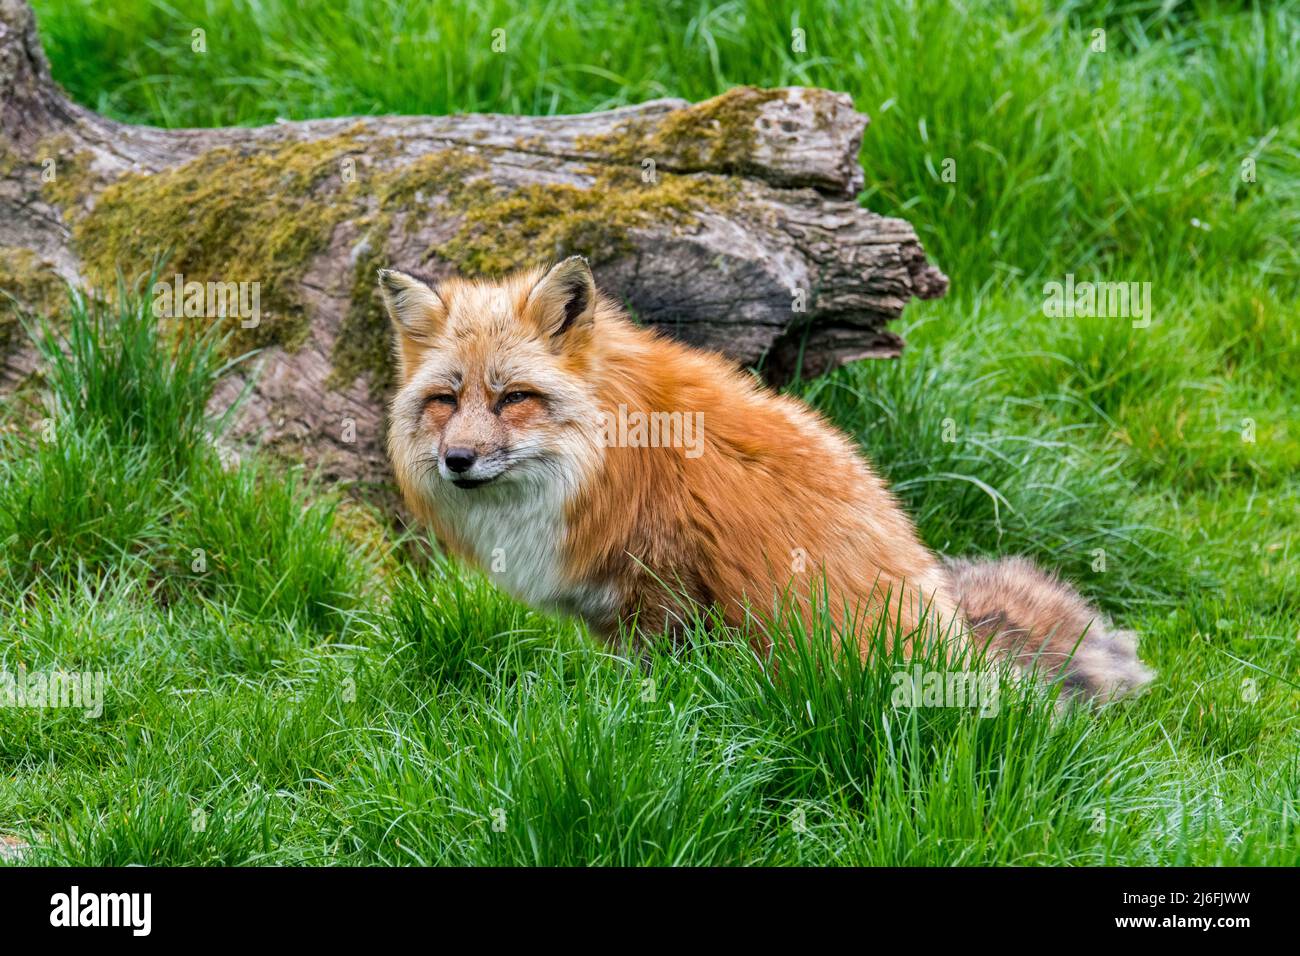 Red fox (Vulpes vulpes) in thick winter coat / fur hunting mice, voles and insects in long grass in field / grassland / meadow in spring Stock Photo